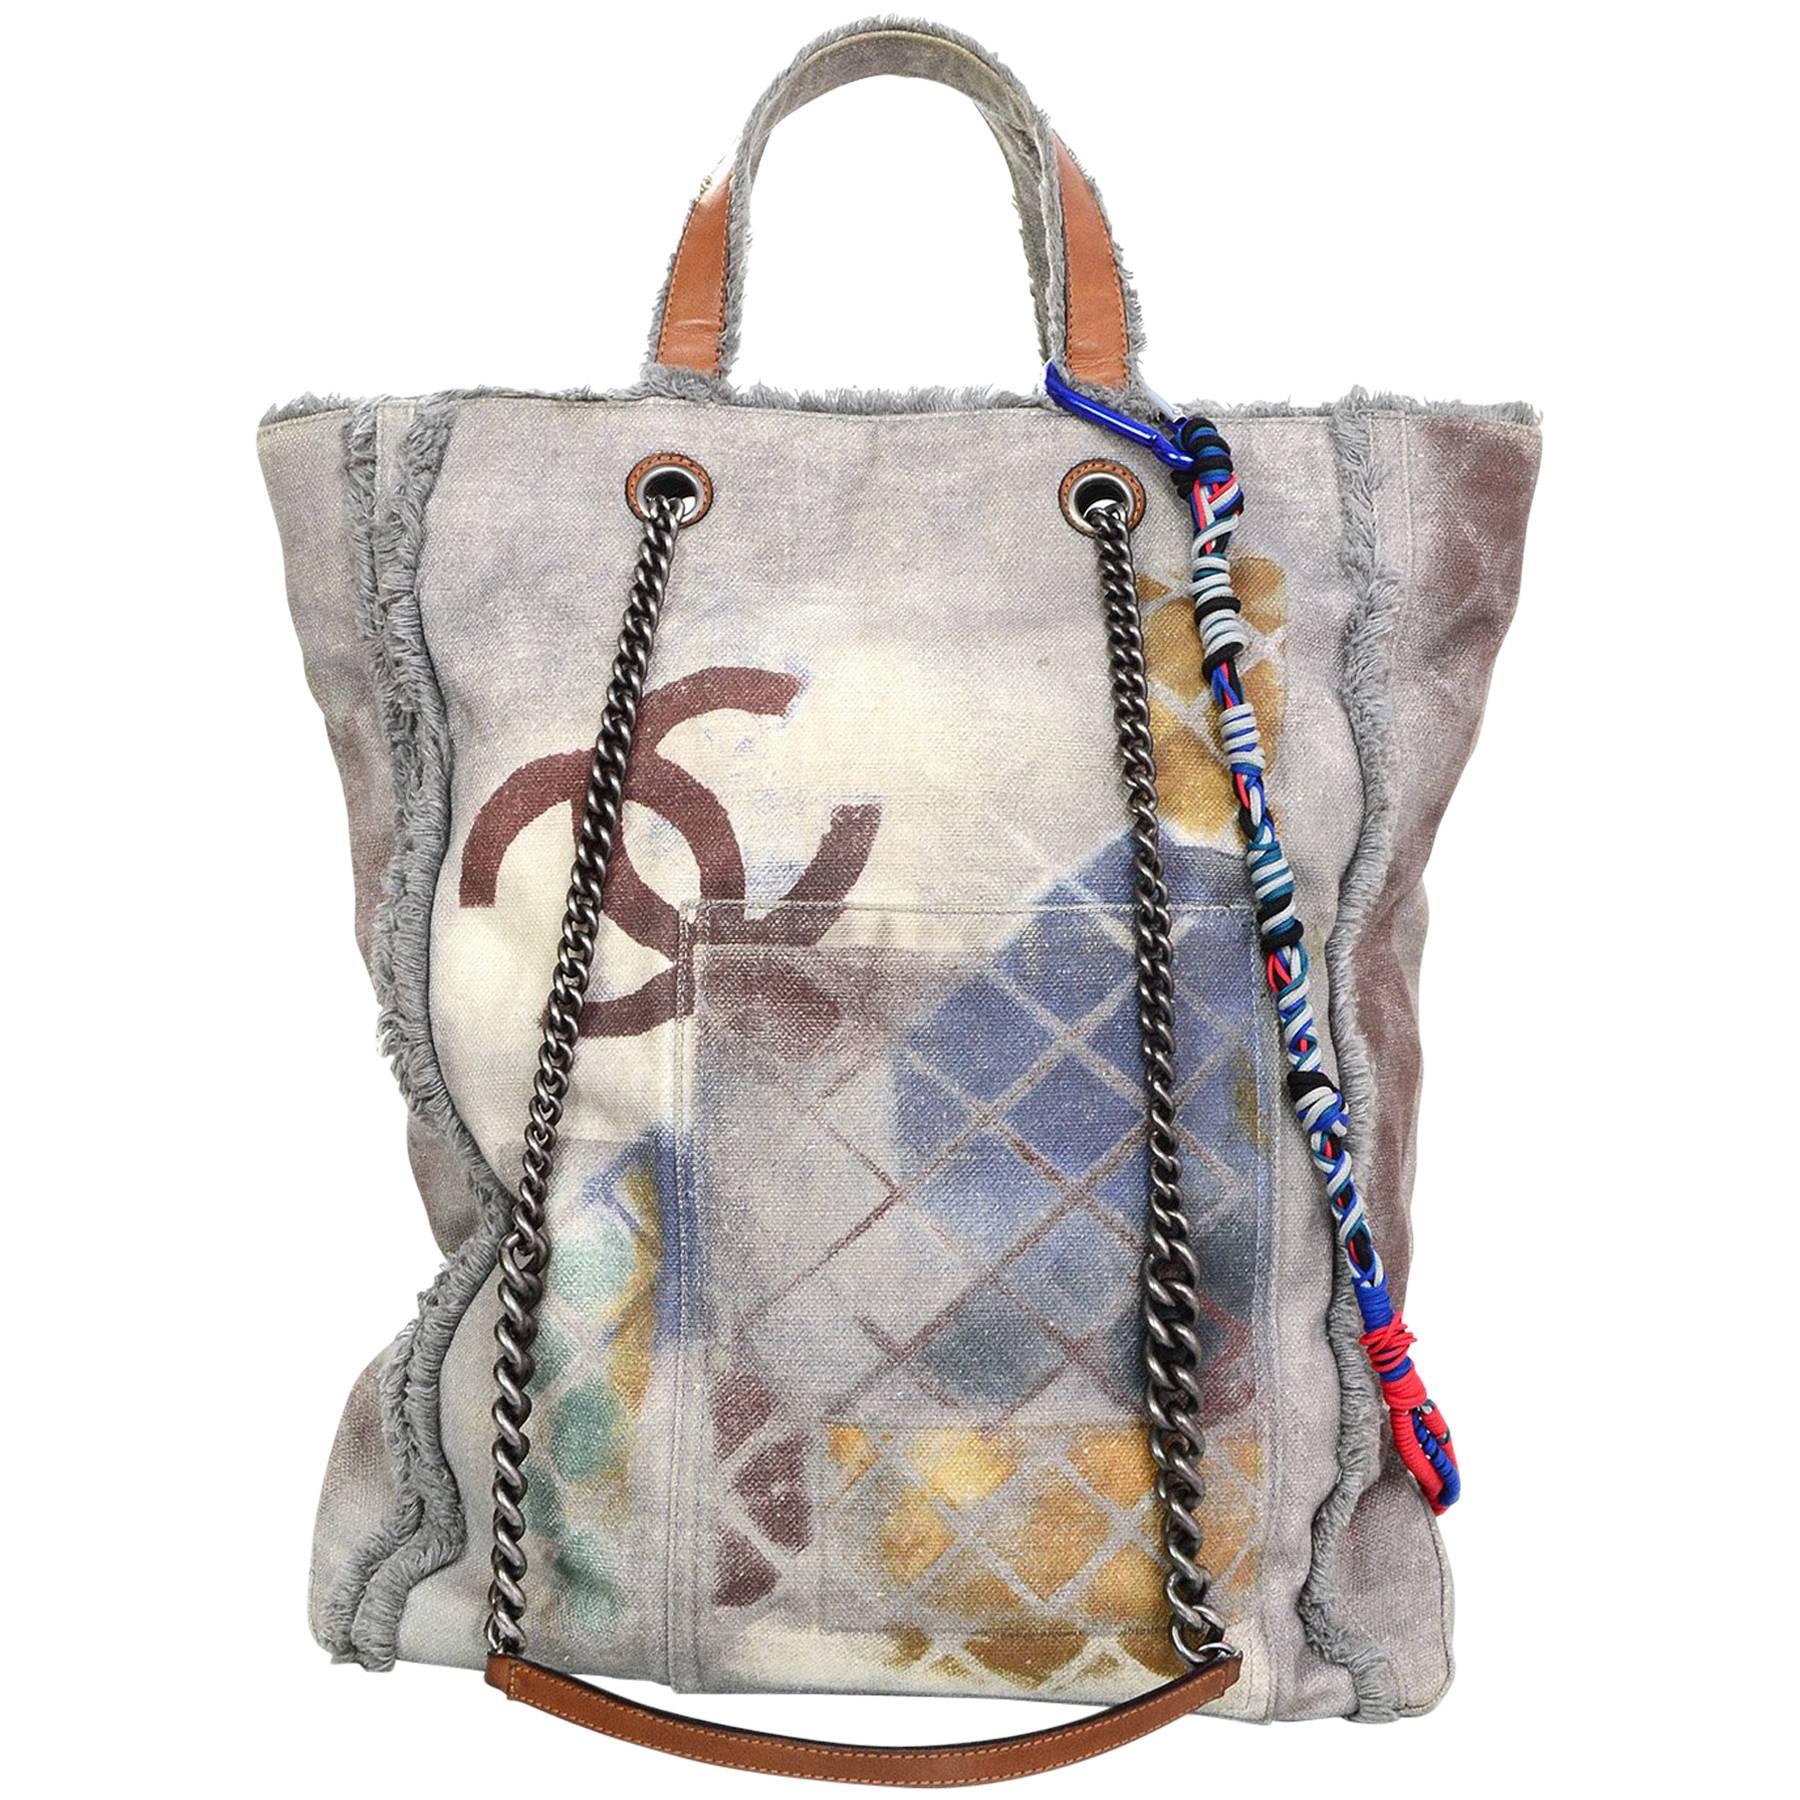 Chanel Collector's Sold Out Grey Canvas Printed Graffiti Tote Bag